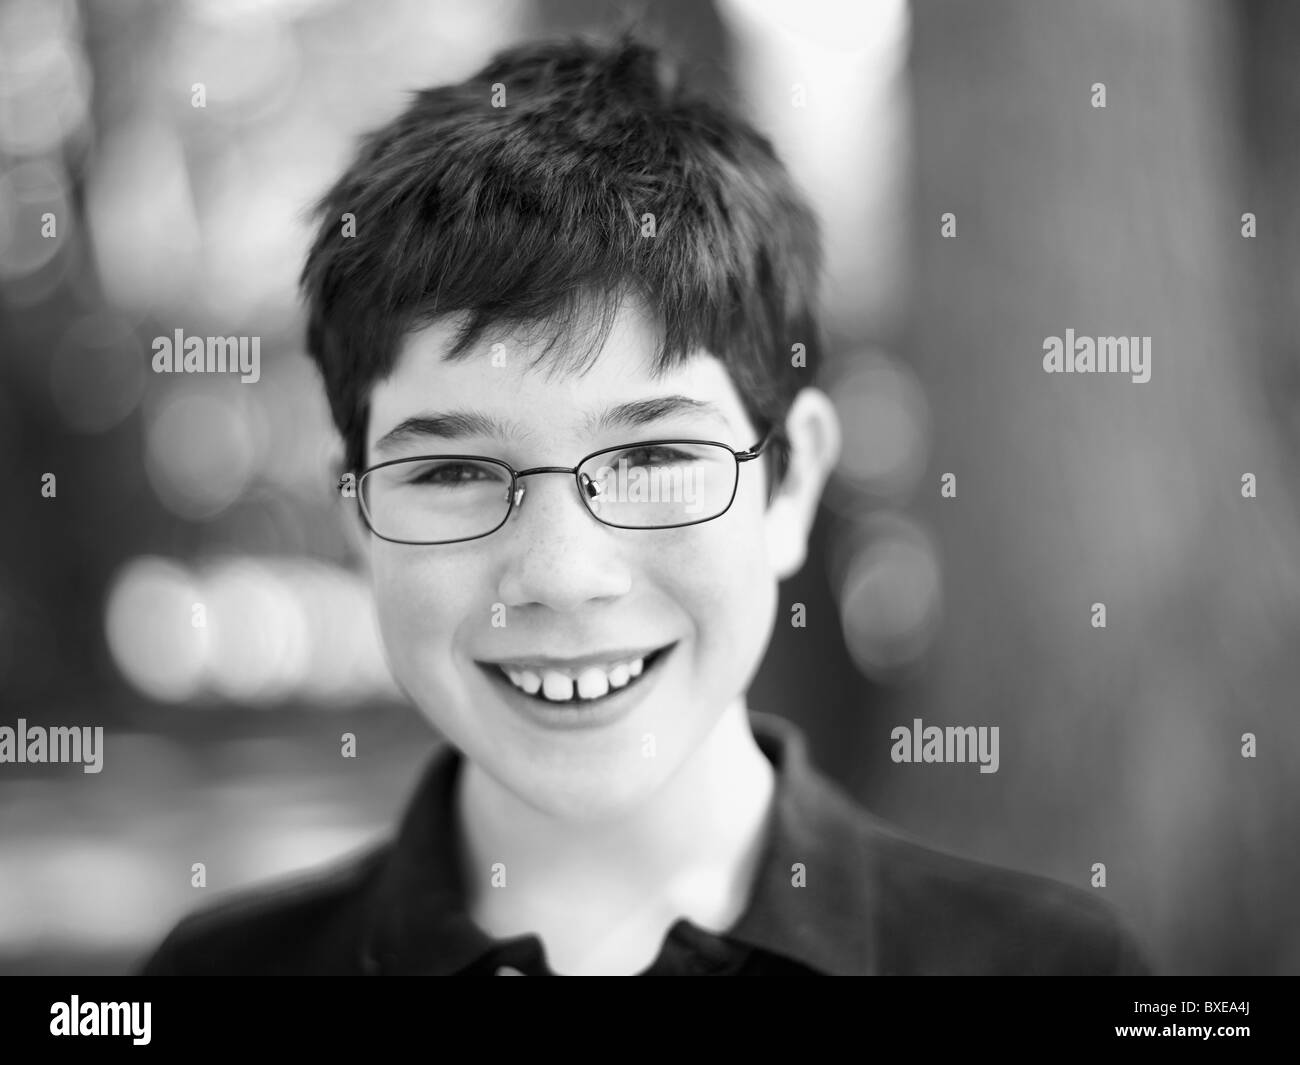 Cute child wearing reading glasses Stock Photo